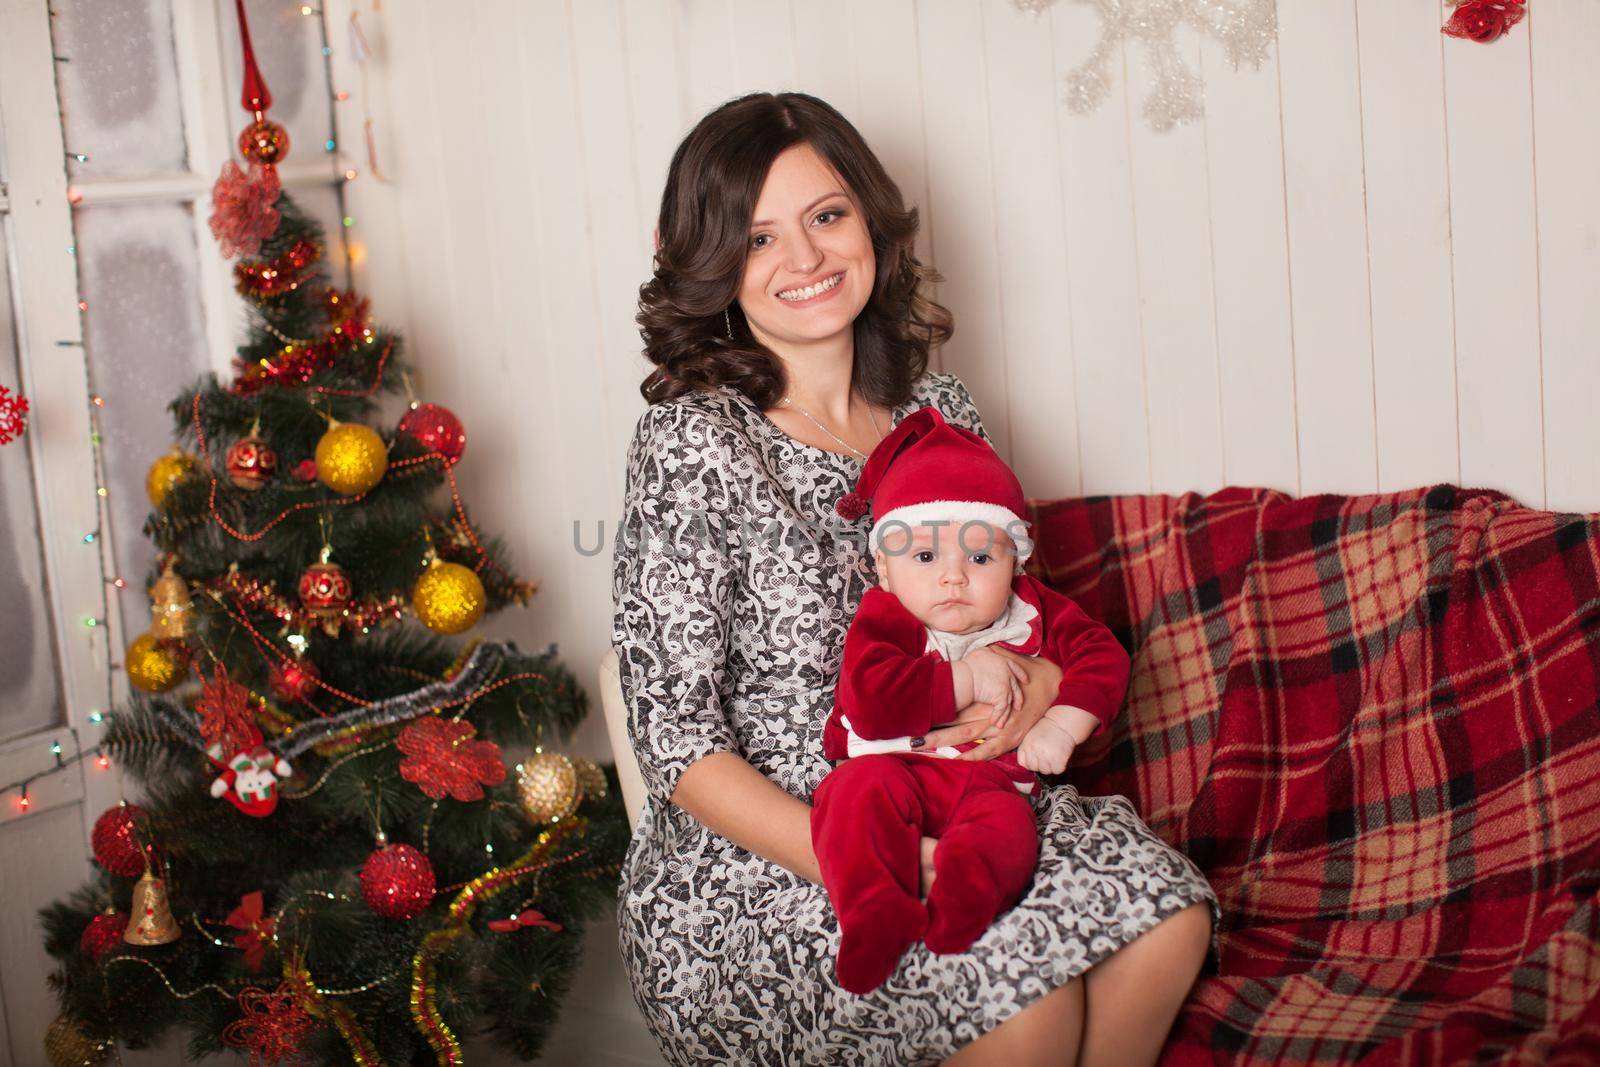 Mom and son in Santa Claus costume in a home setting near a Christmas tree against a white wooden wall